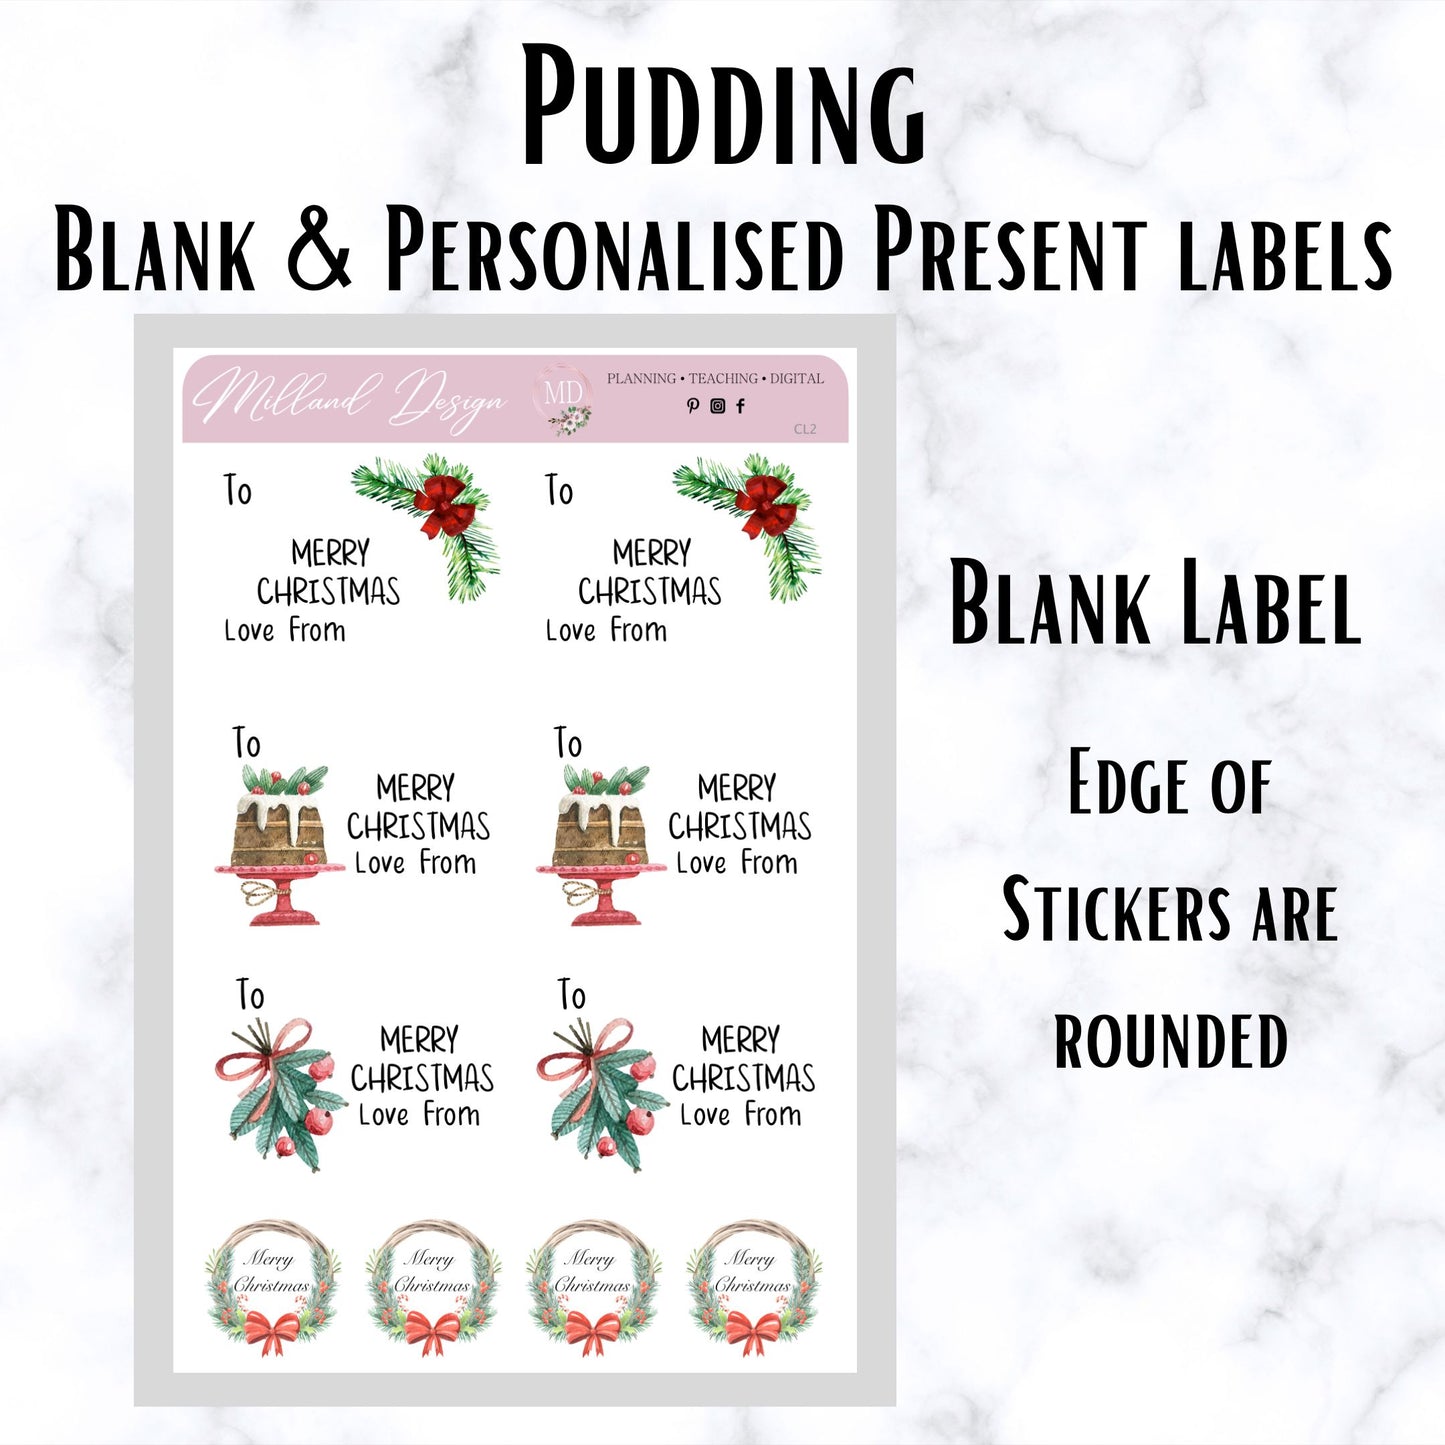 Pudding Blank & Personalised Christmas Present Labels